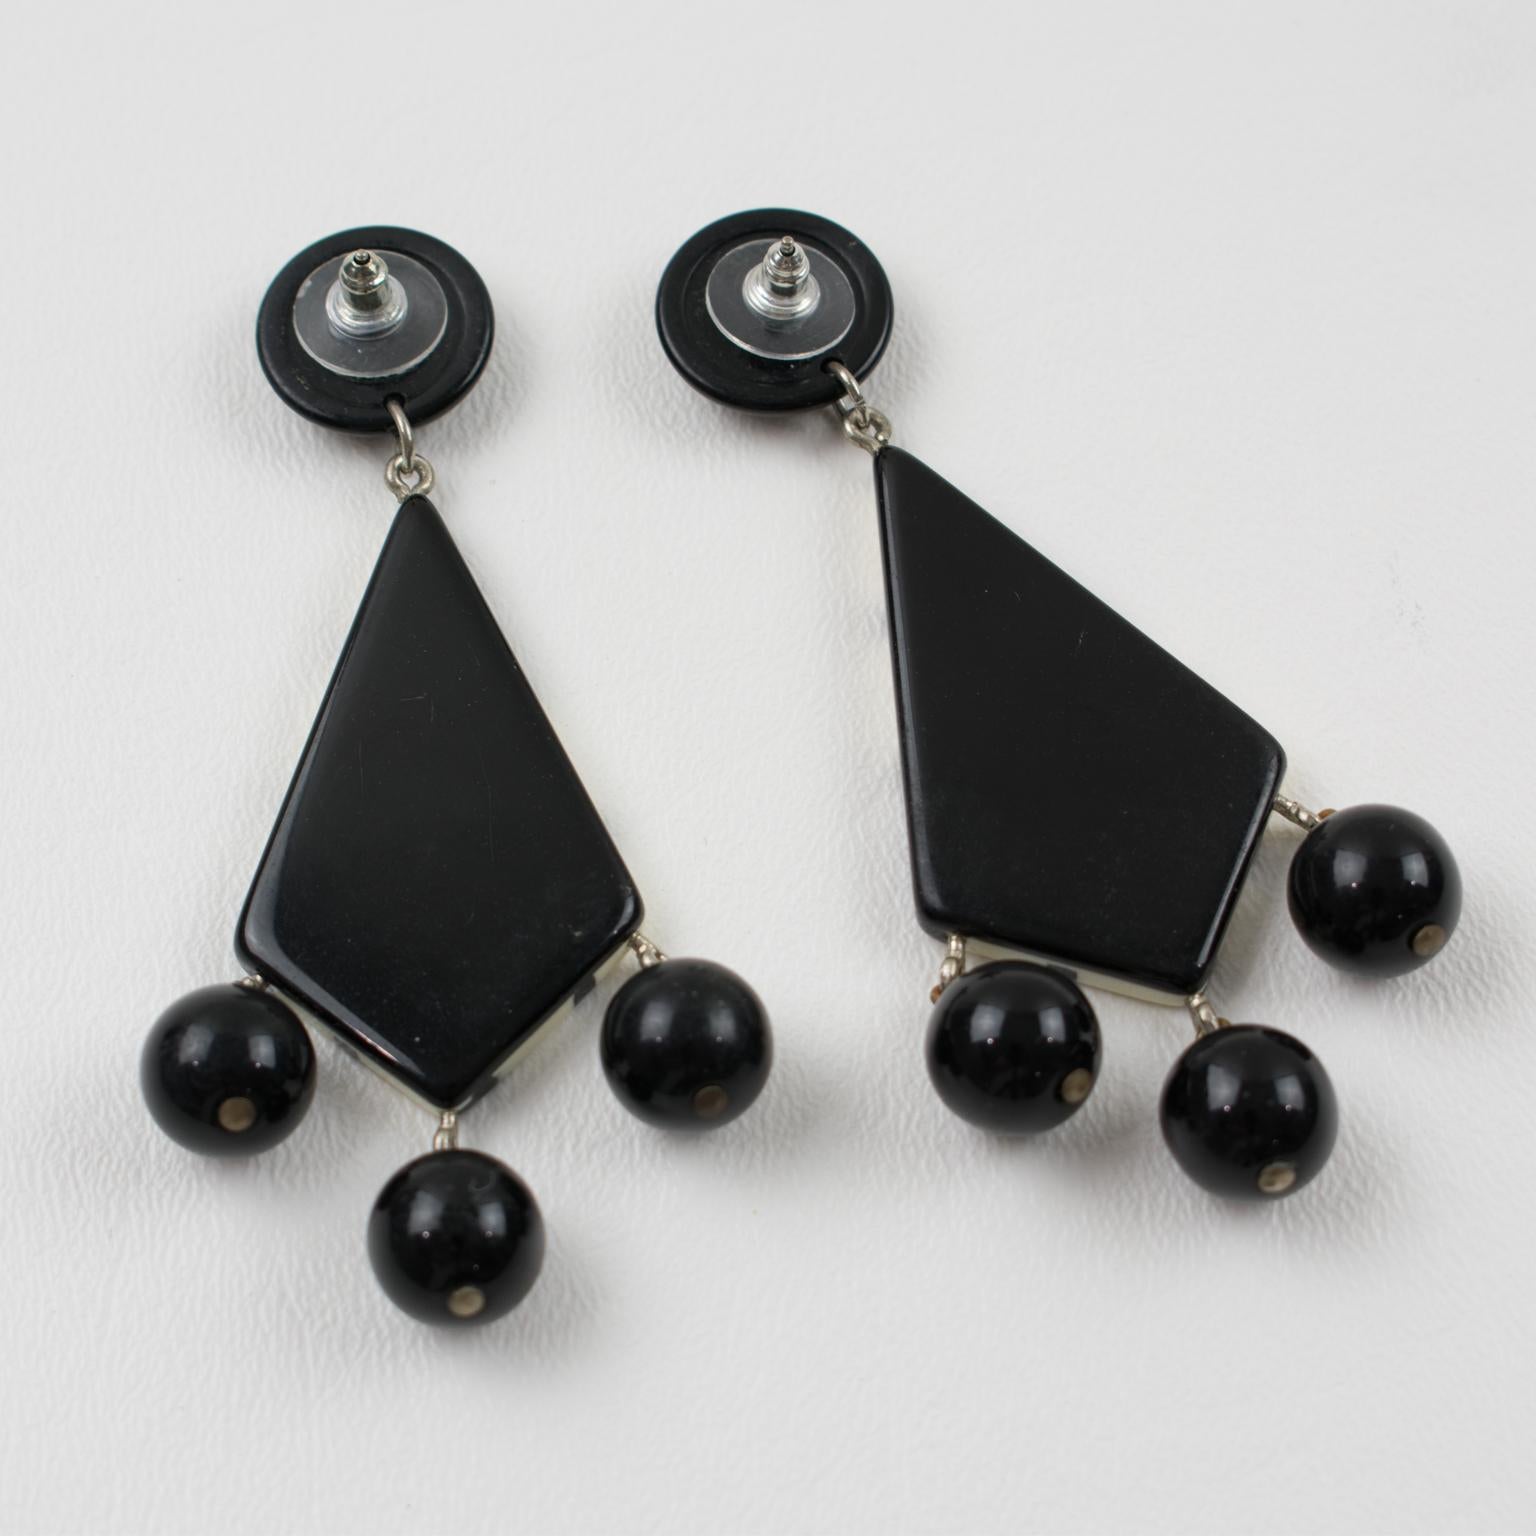 Black and White Checkerboard Lucite Pierced Earrings In Excellent Condition For Sale In Atlanta, GA